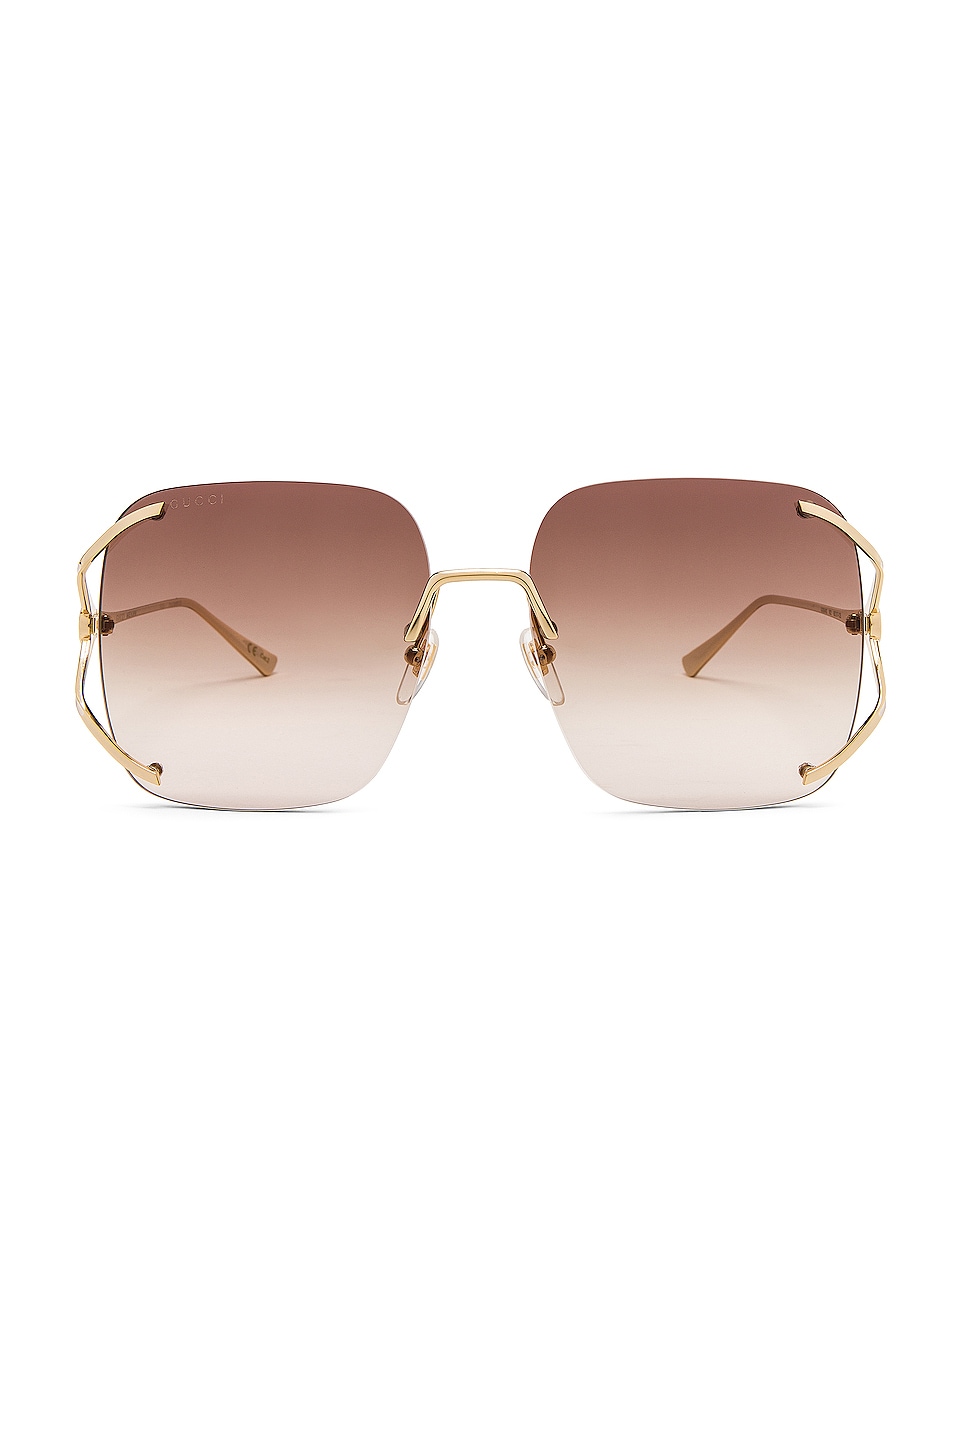 Gucci Rectangle Fork in Shiny Gold, Ivory & Brown Gradient | REVOLVE